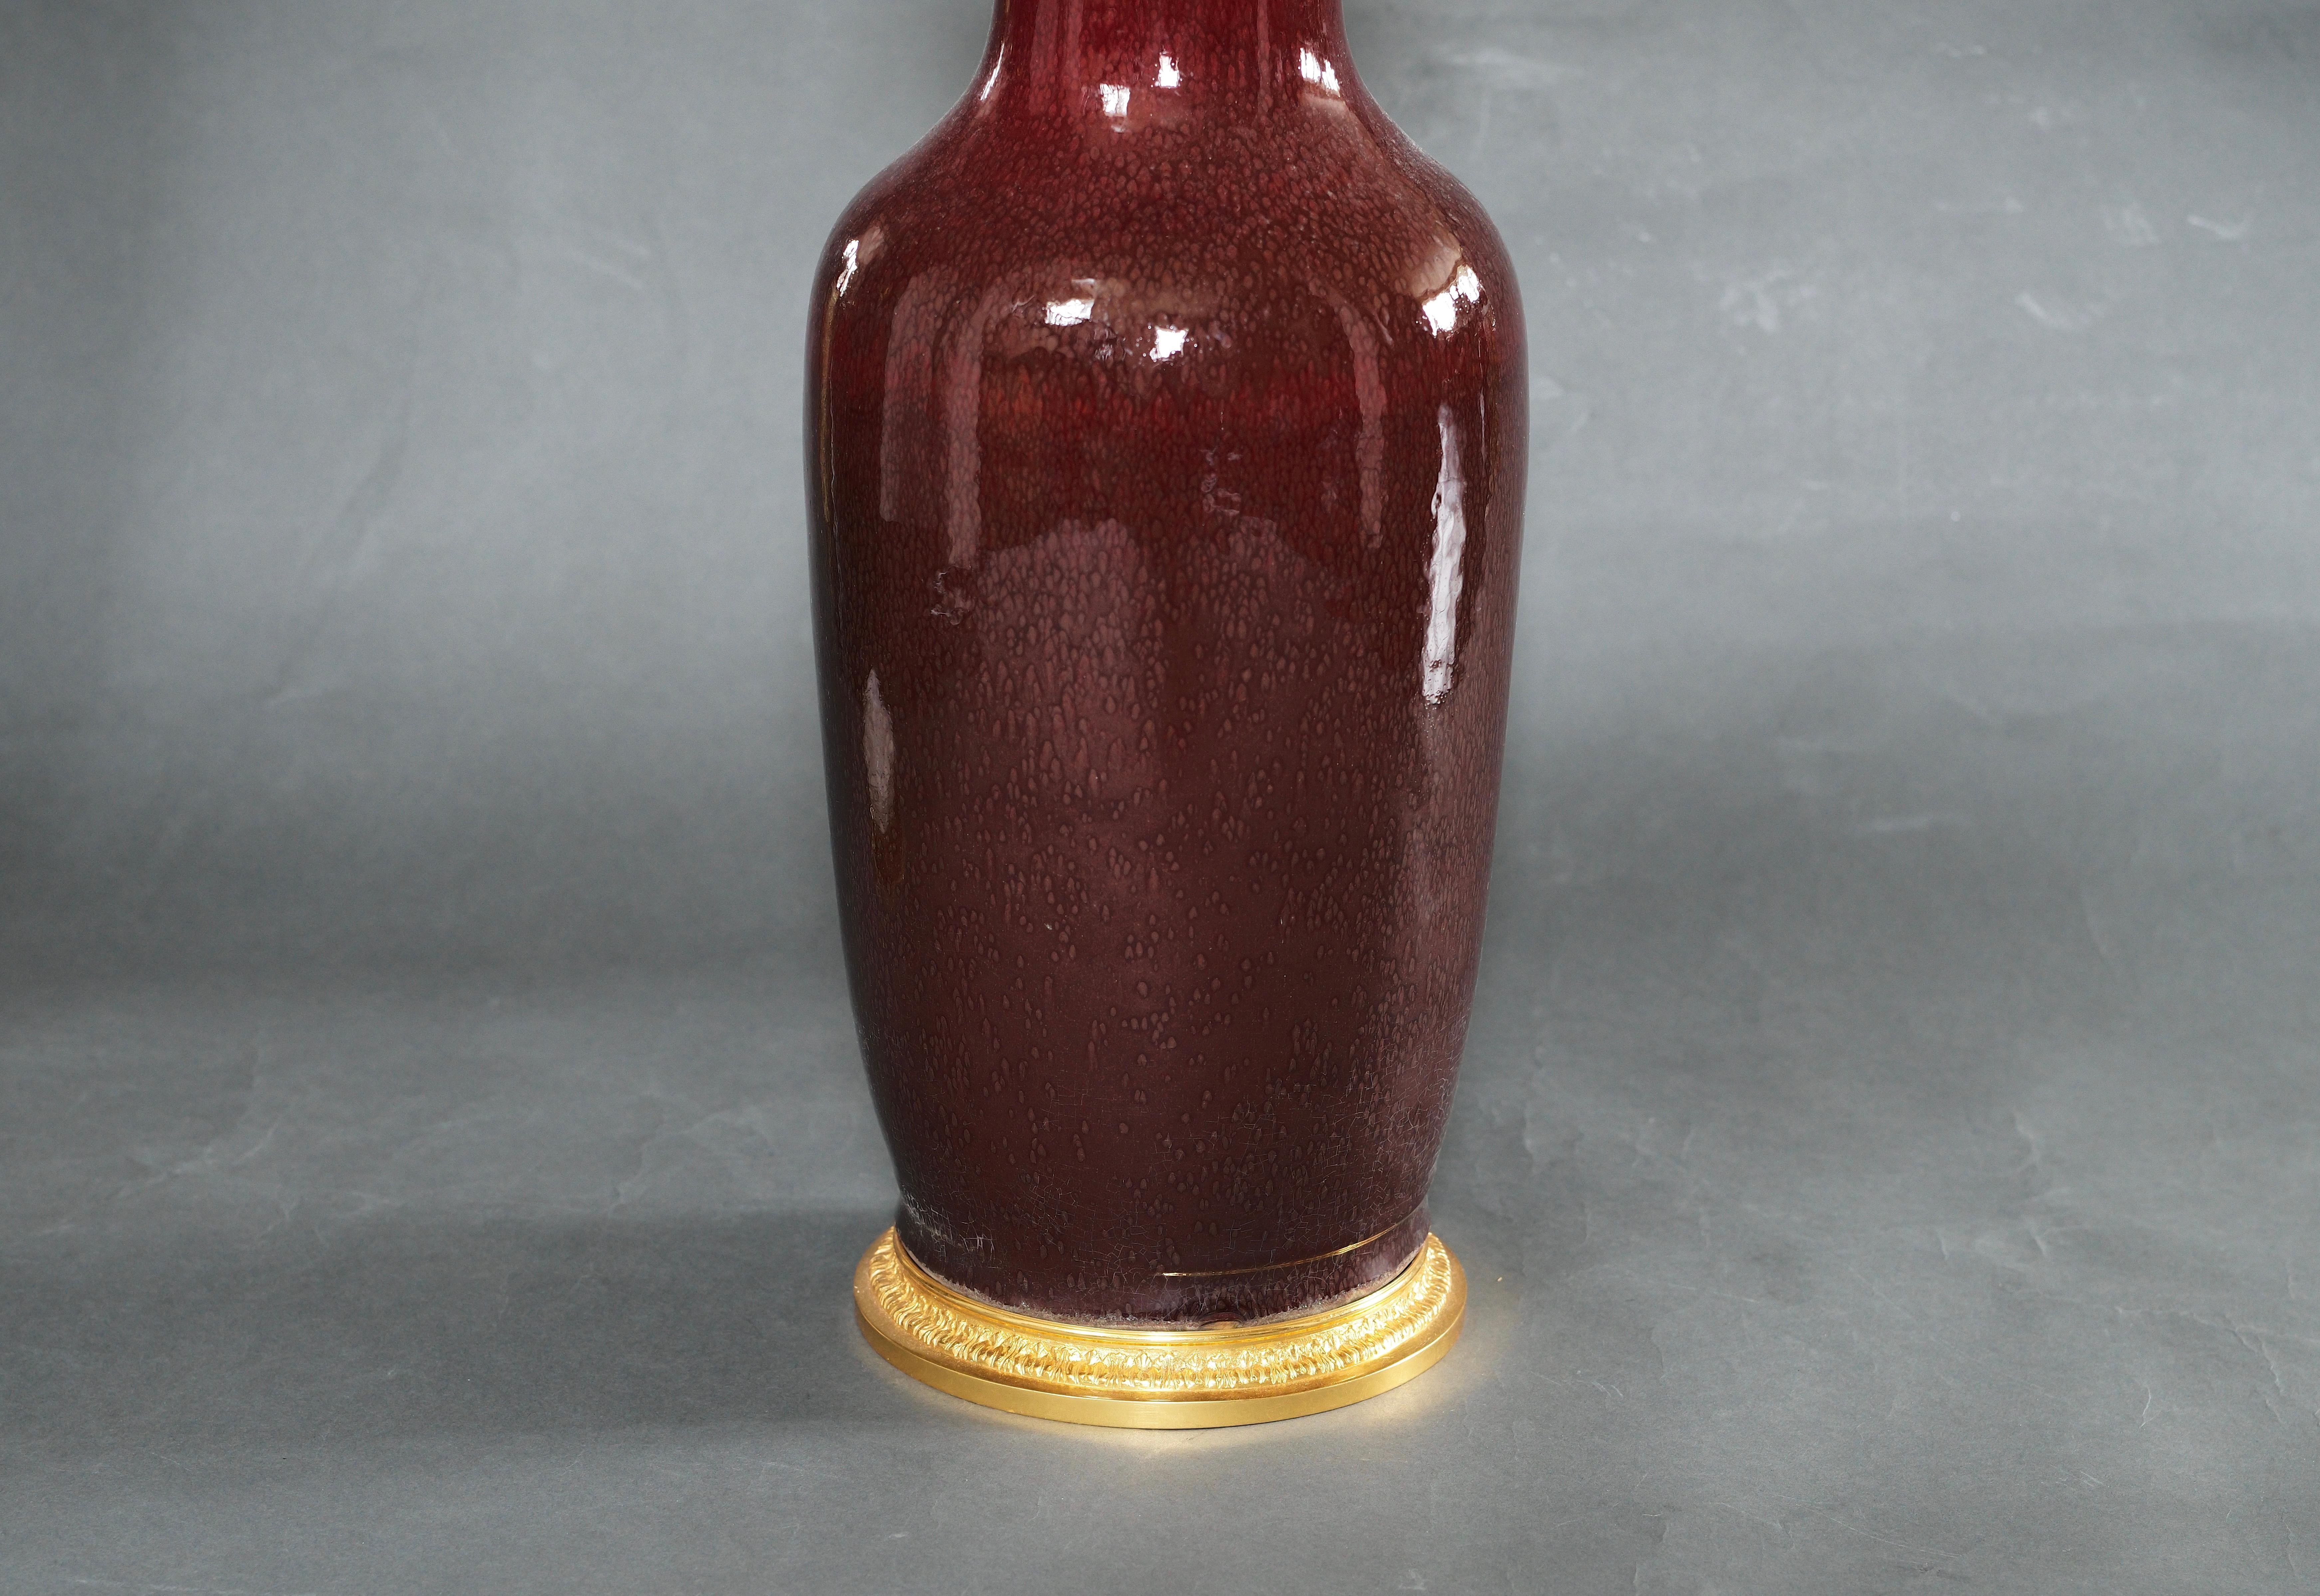 Pair of oxblood porcelain vase with fine cast gilt brass bases mount as lamps.
To the top of the porcelain is 22